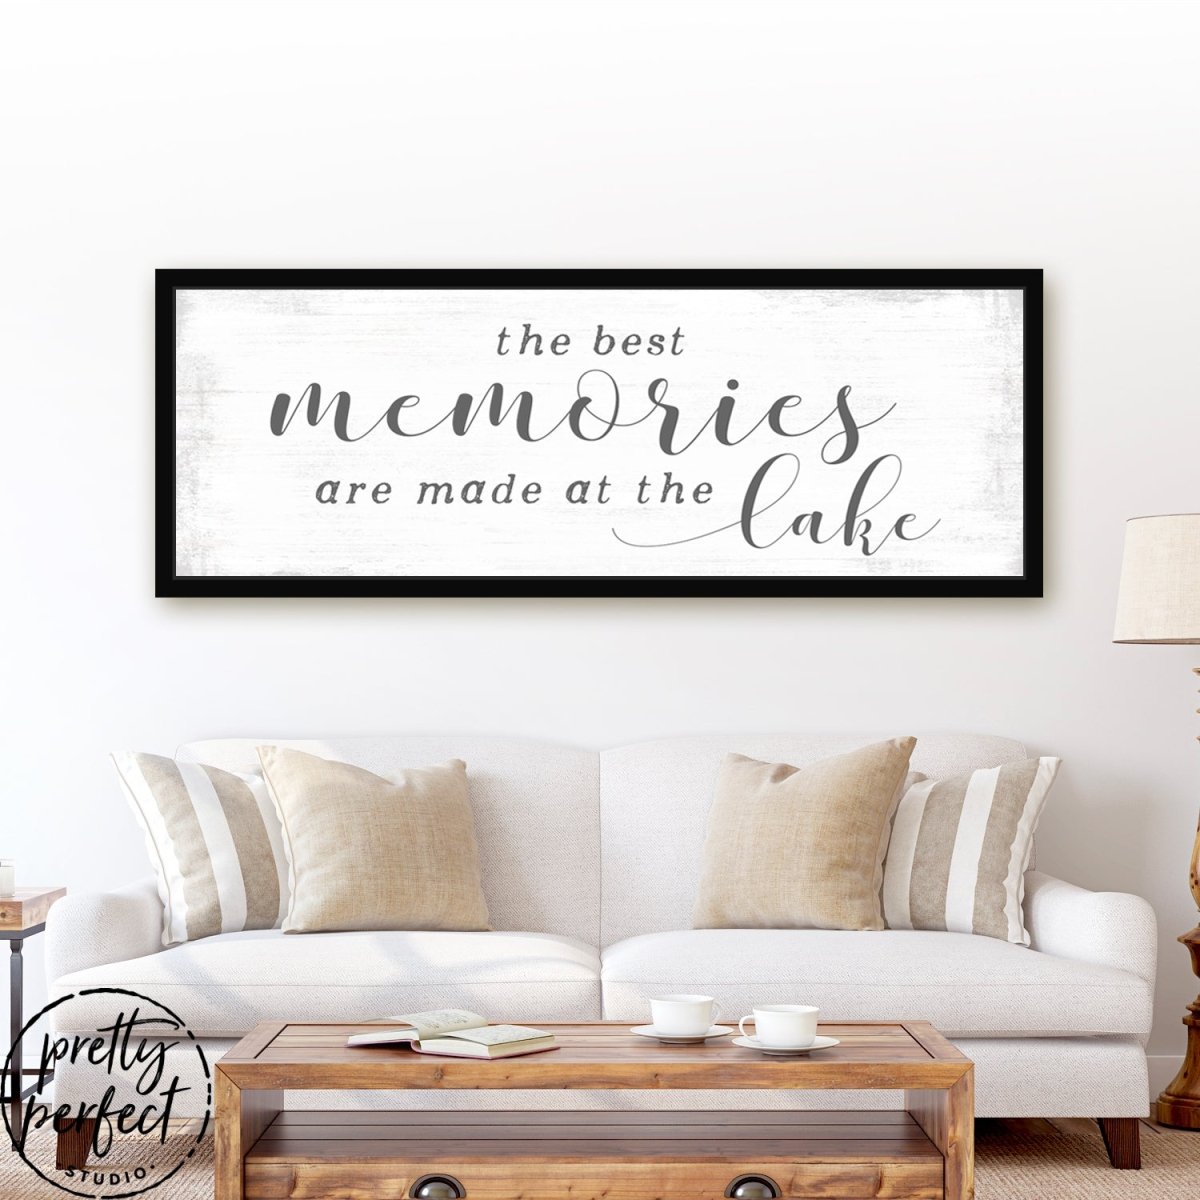 The Best Memories Are Made at the Lake Sign Above Couch - Pretty Perfect Studio